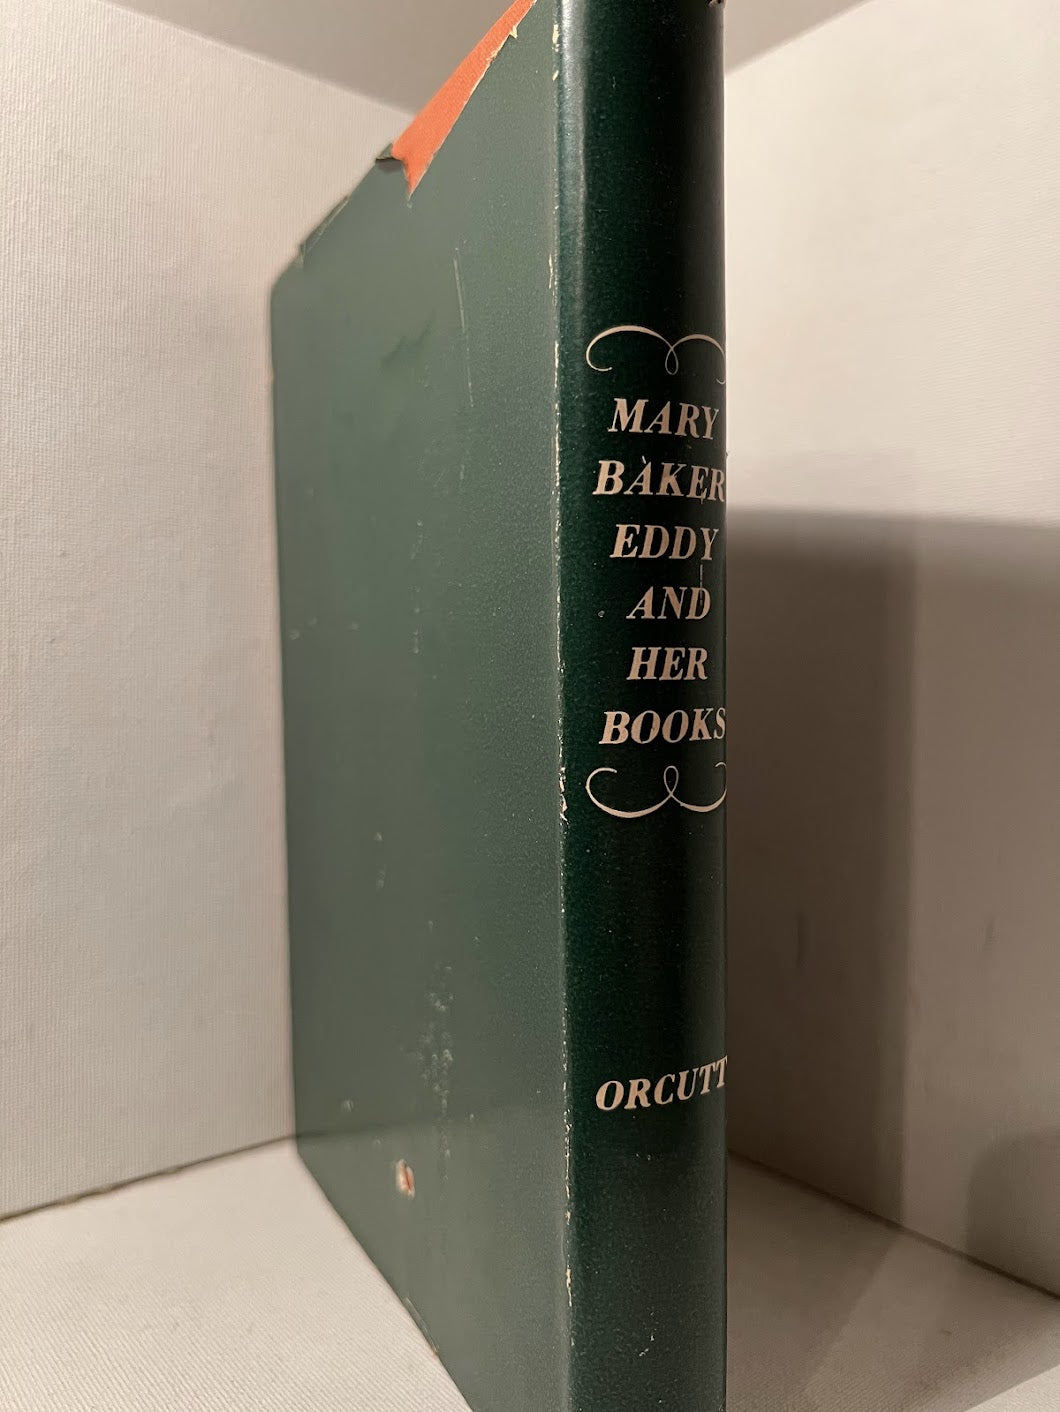 Mary Baker Eddy and Her Books by William Dana Orcutt